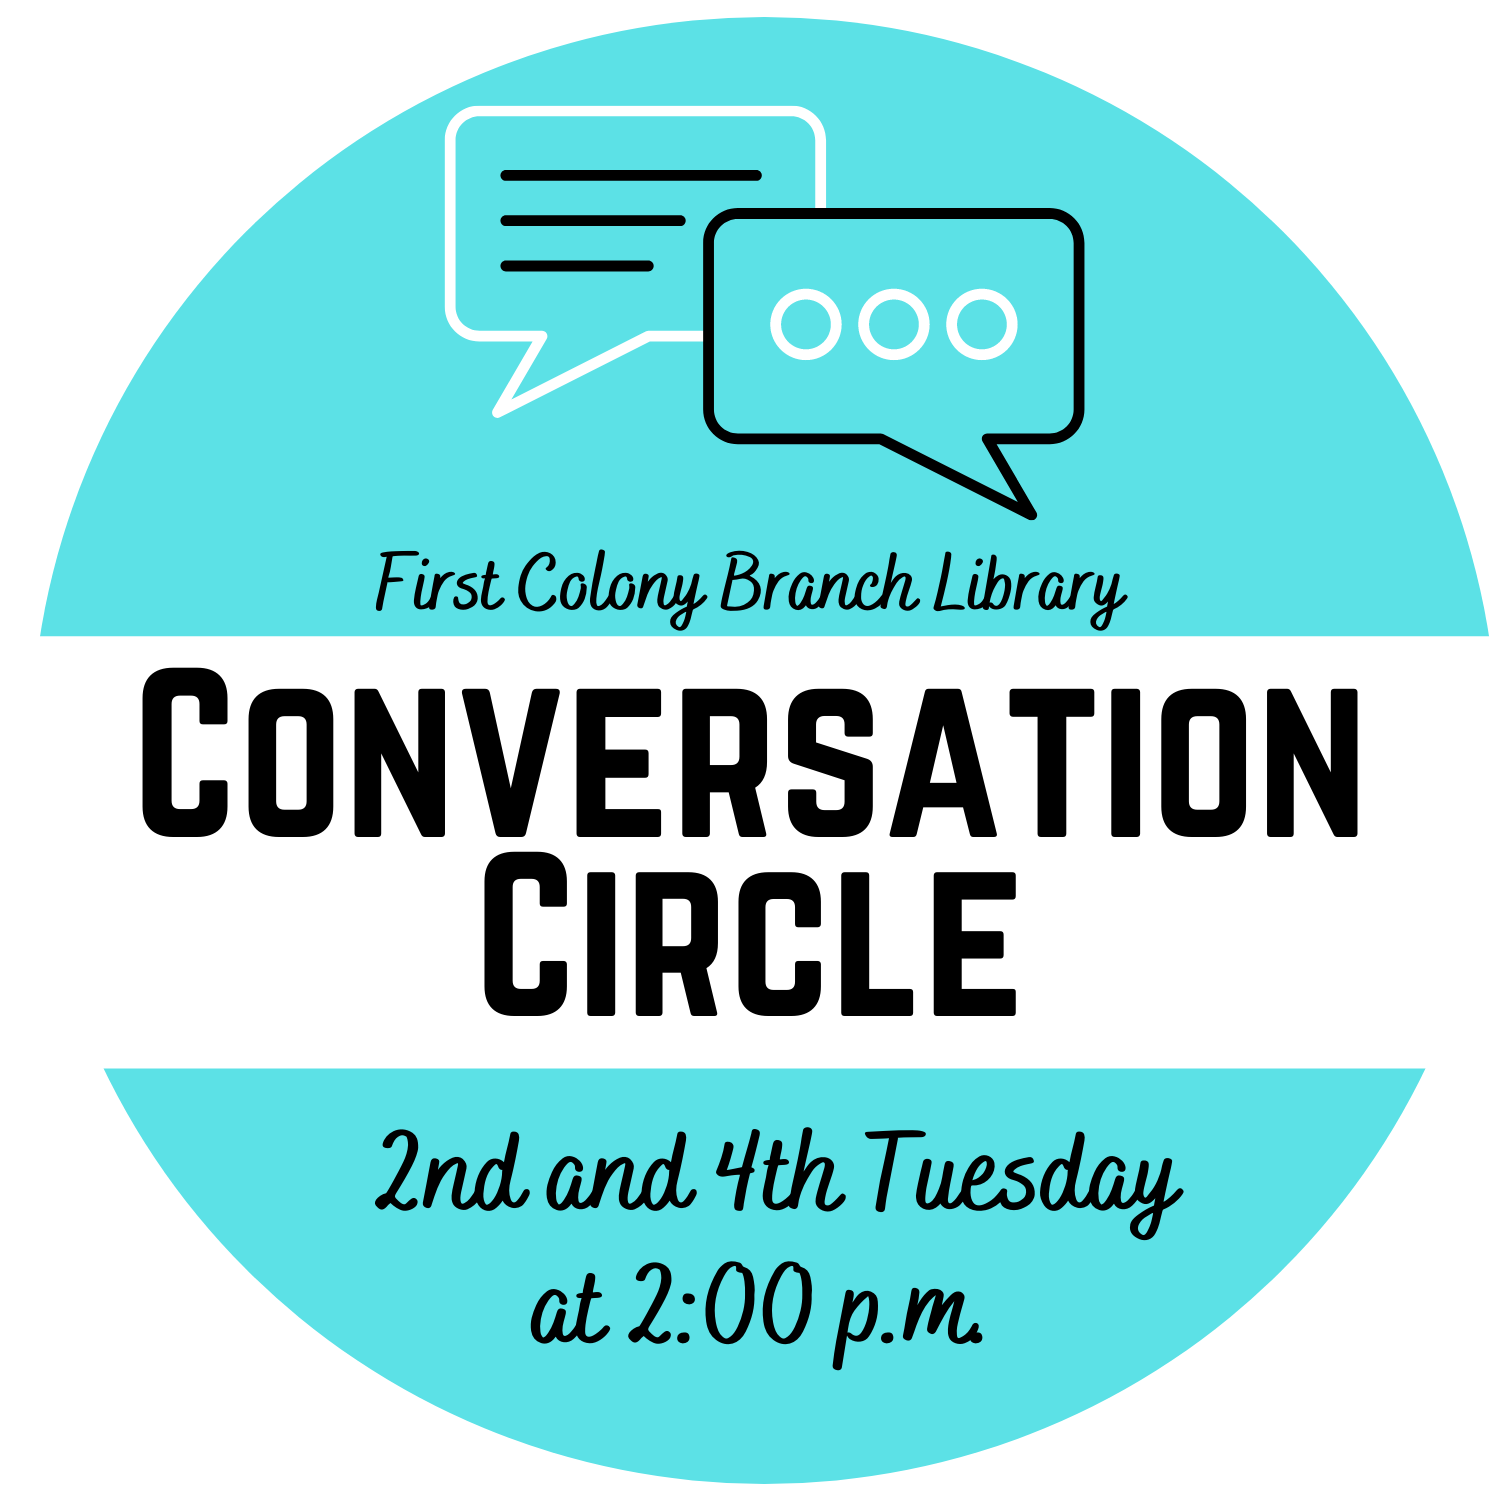 Image of speech bubbles and text of Conversation Circle 2nd and 4th Tuesday at 2:00pm